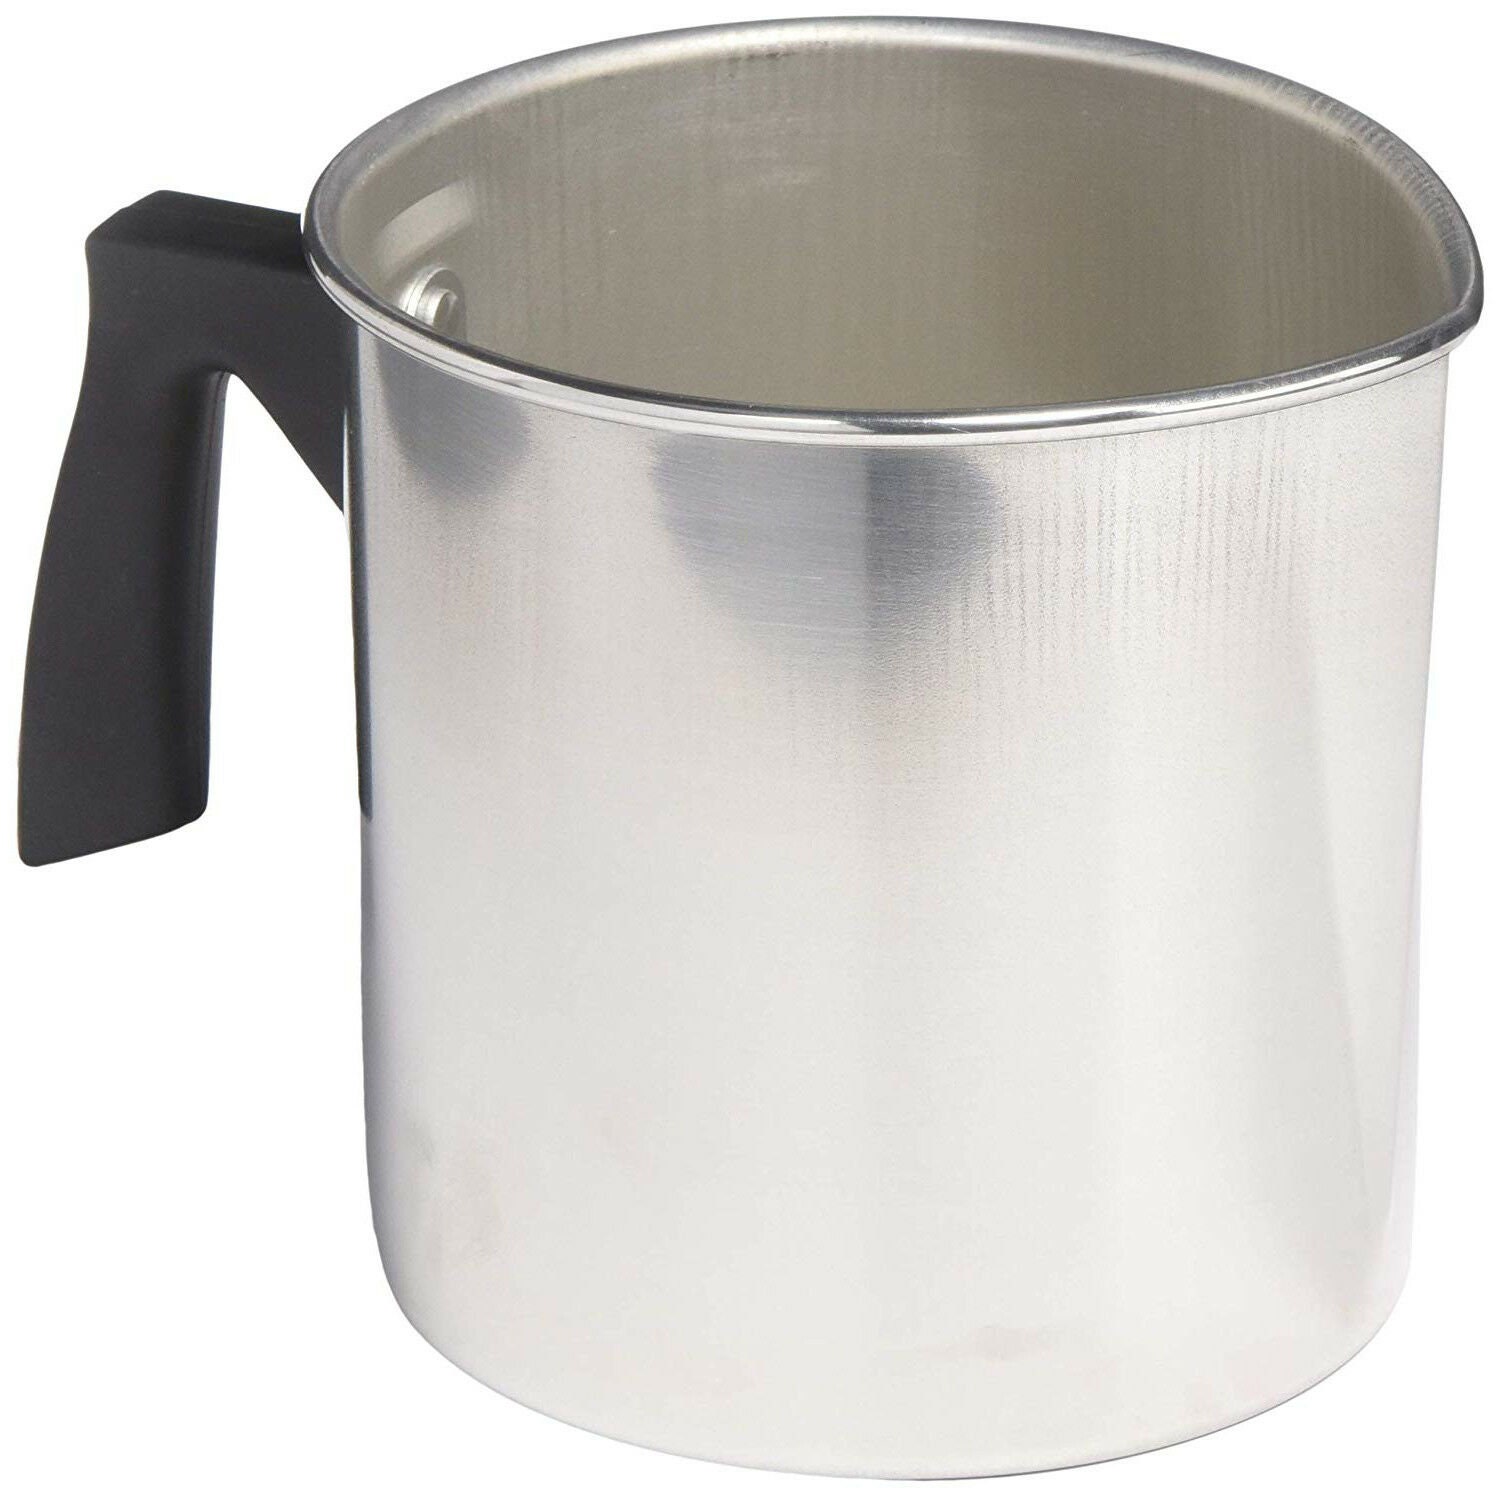 2-liter 2000ml Stainless Steel Measuring Cup/pouring Pitcher Melting Pouring  Cup Pot for Labs/baking/candle Making Supplies Free Shipping 